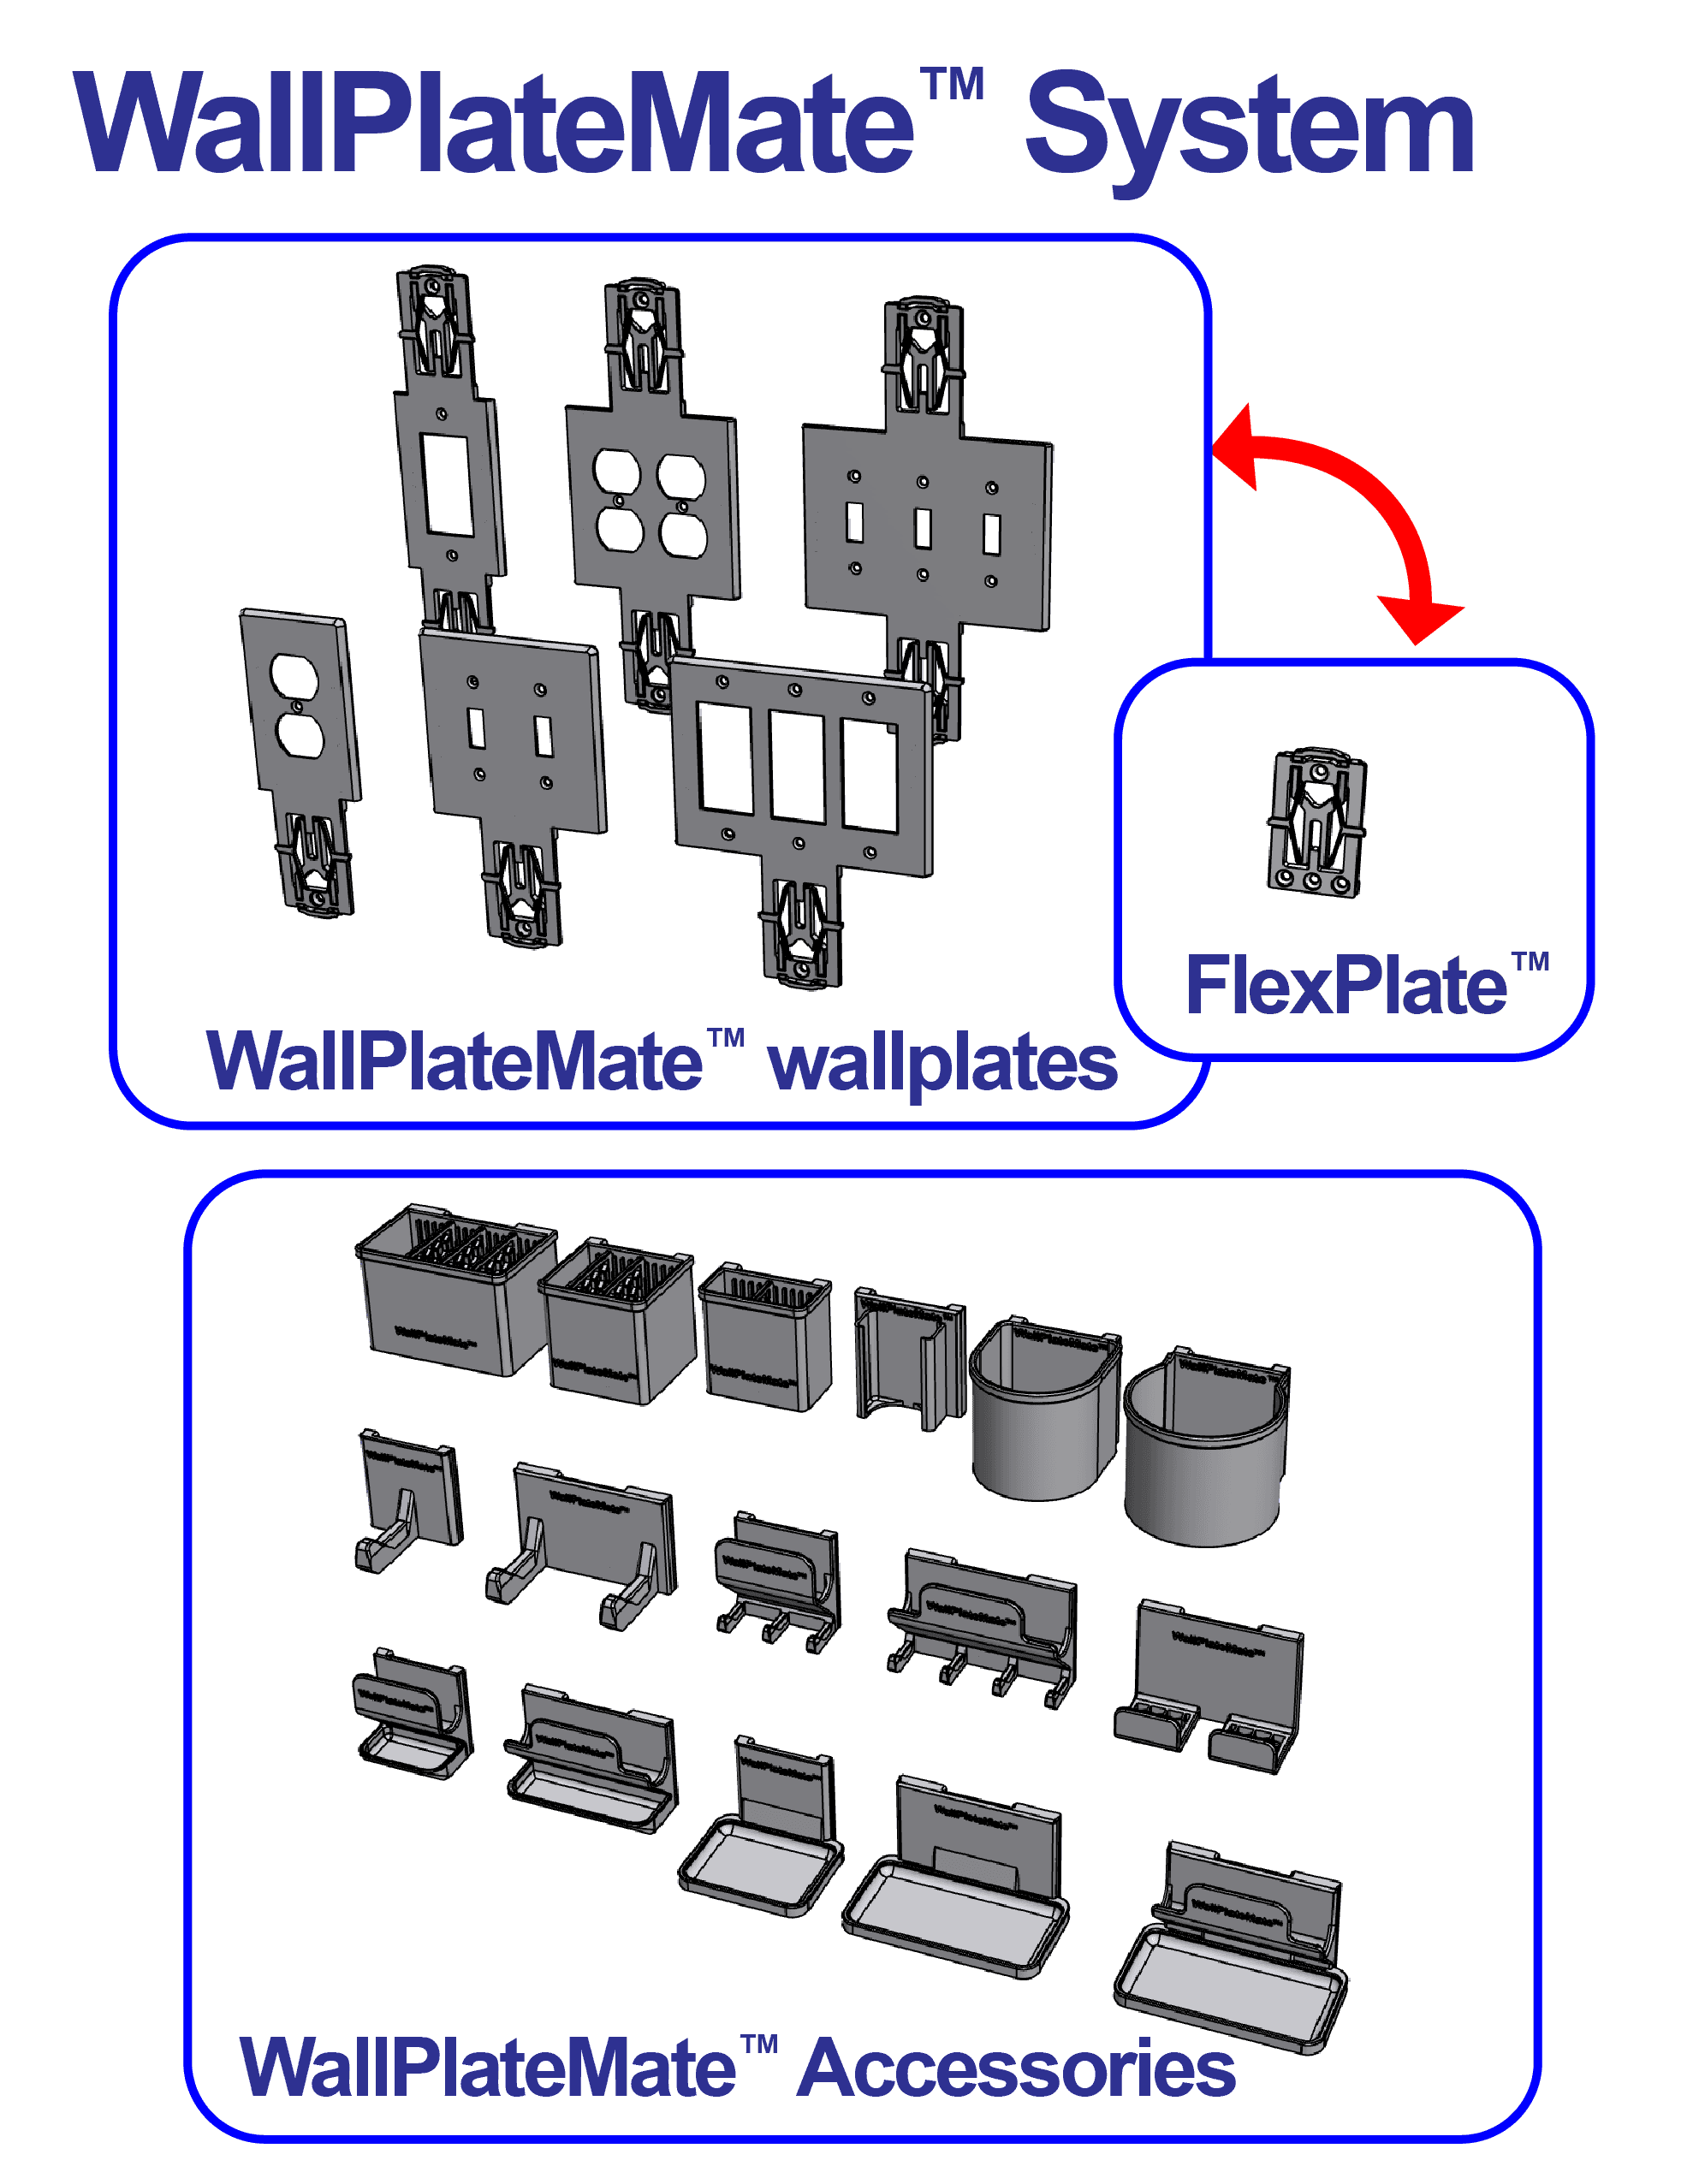 WallPlateMate and FlexPlate wall-mounted accessory system 3d model